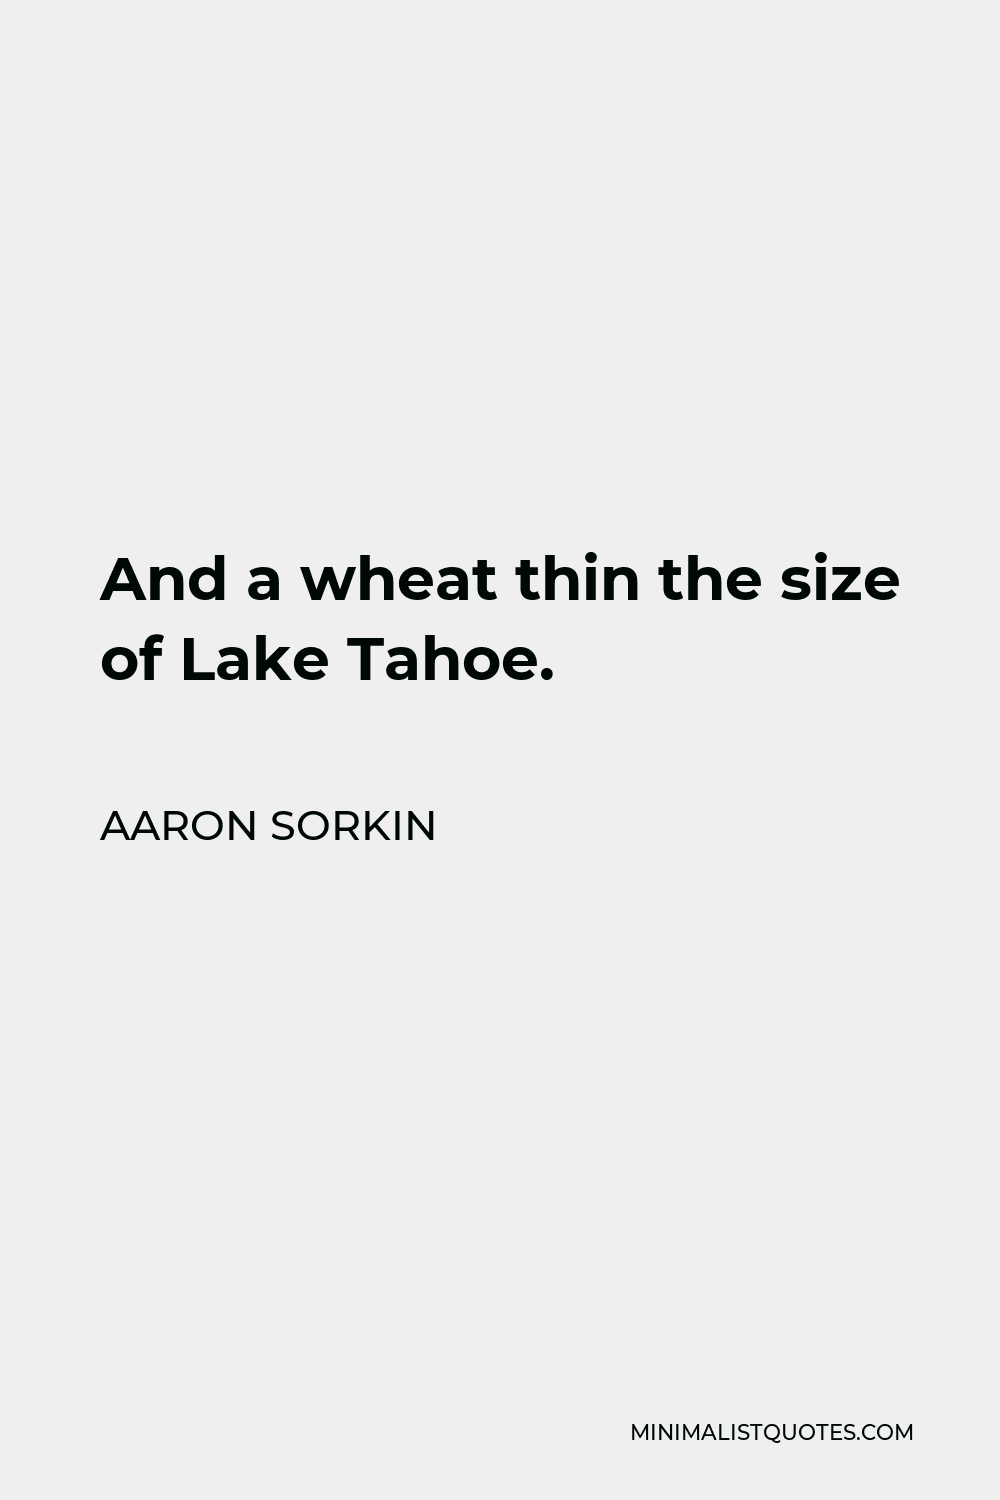 Aaron Sorkin Quote - And a wheat thin the size of Lake Tahoe.